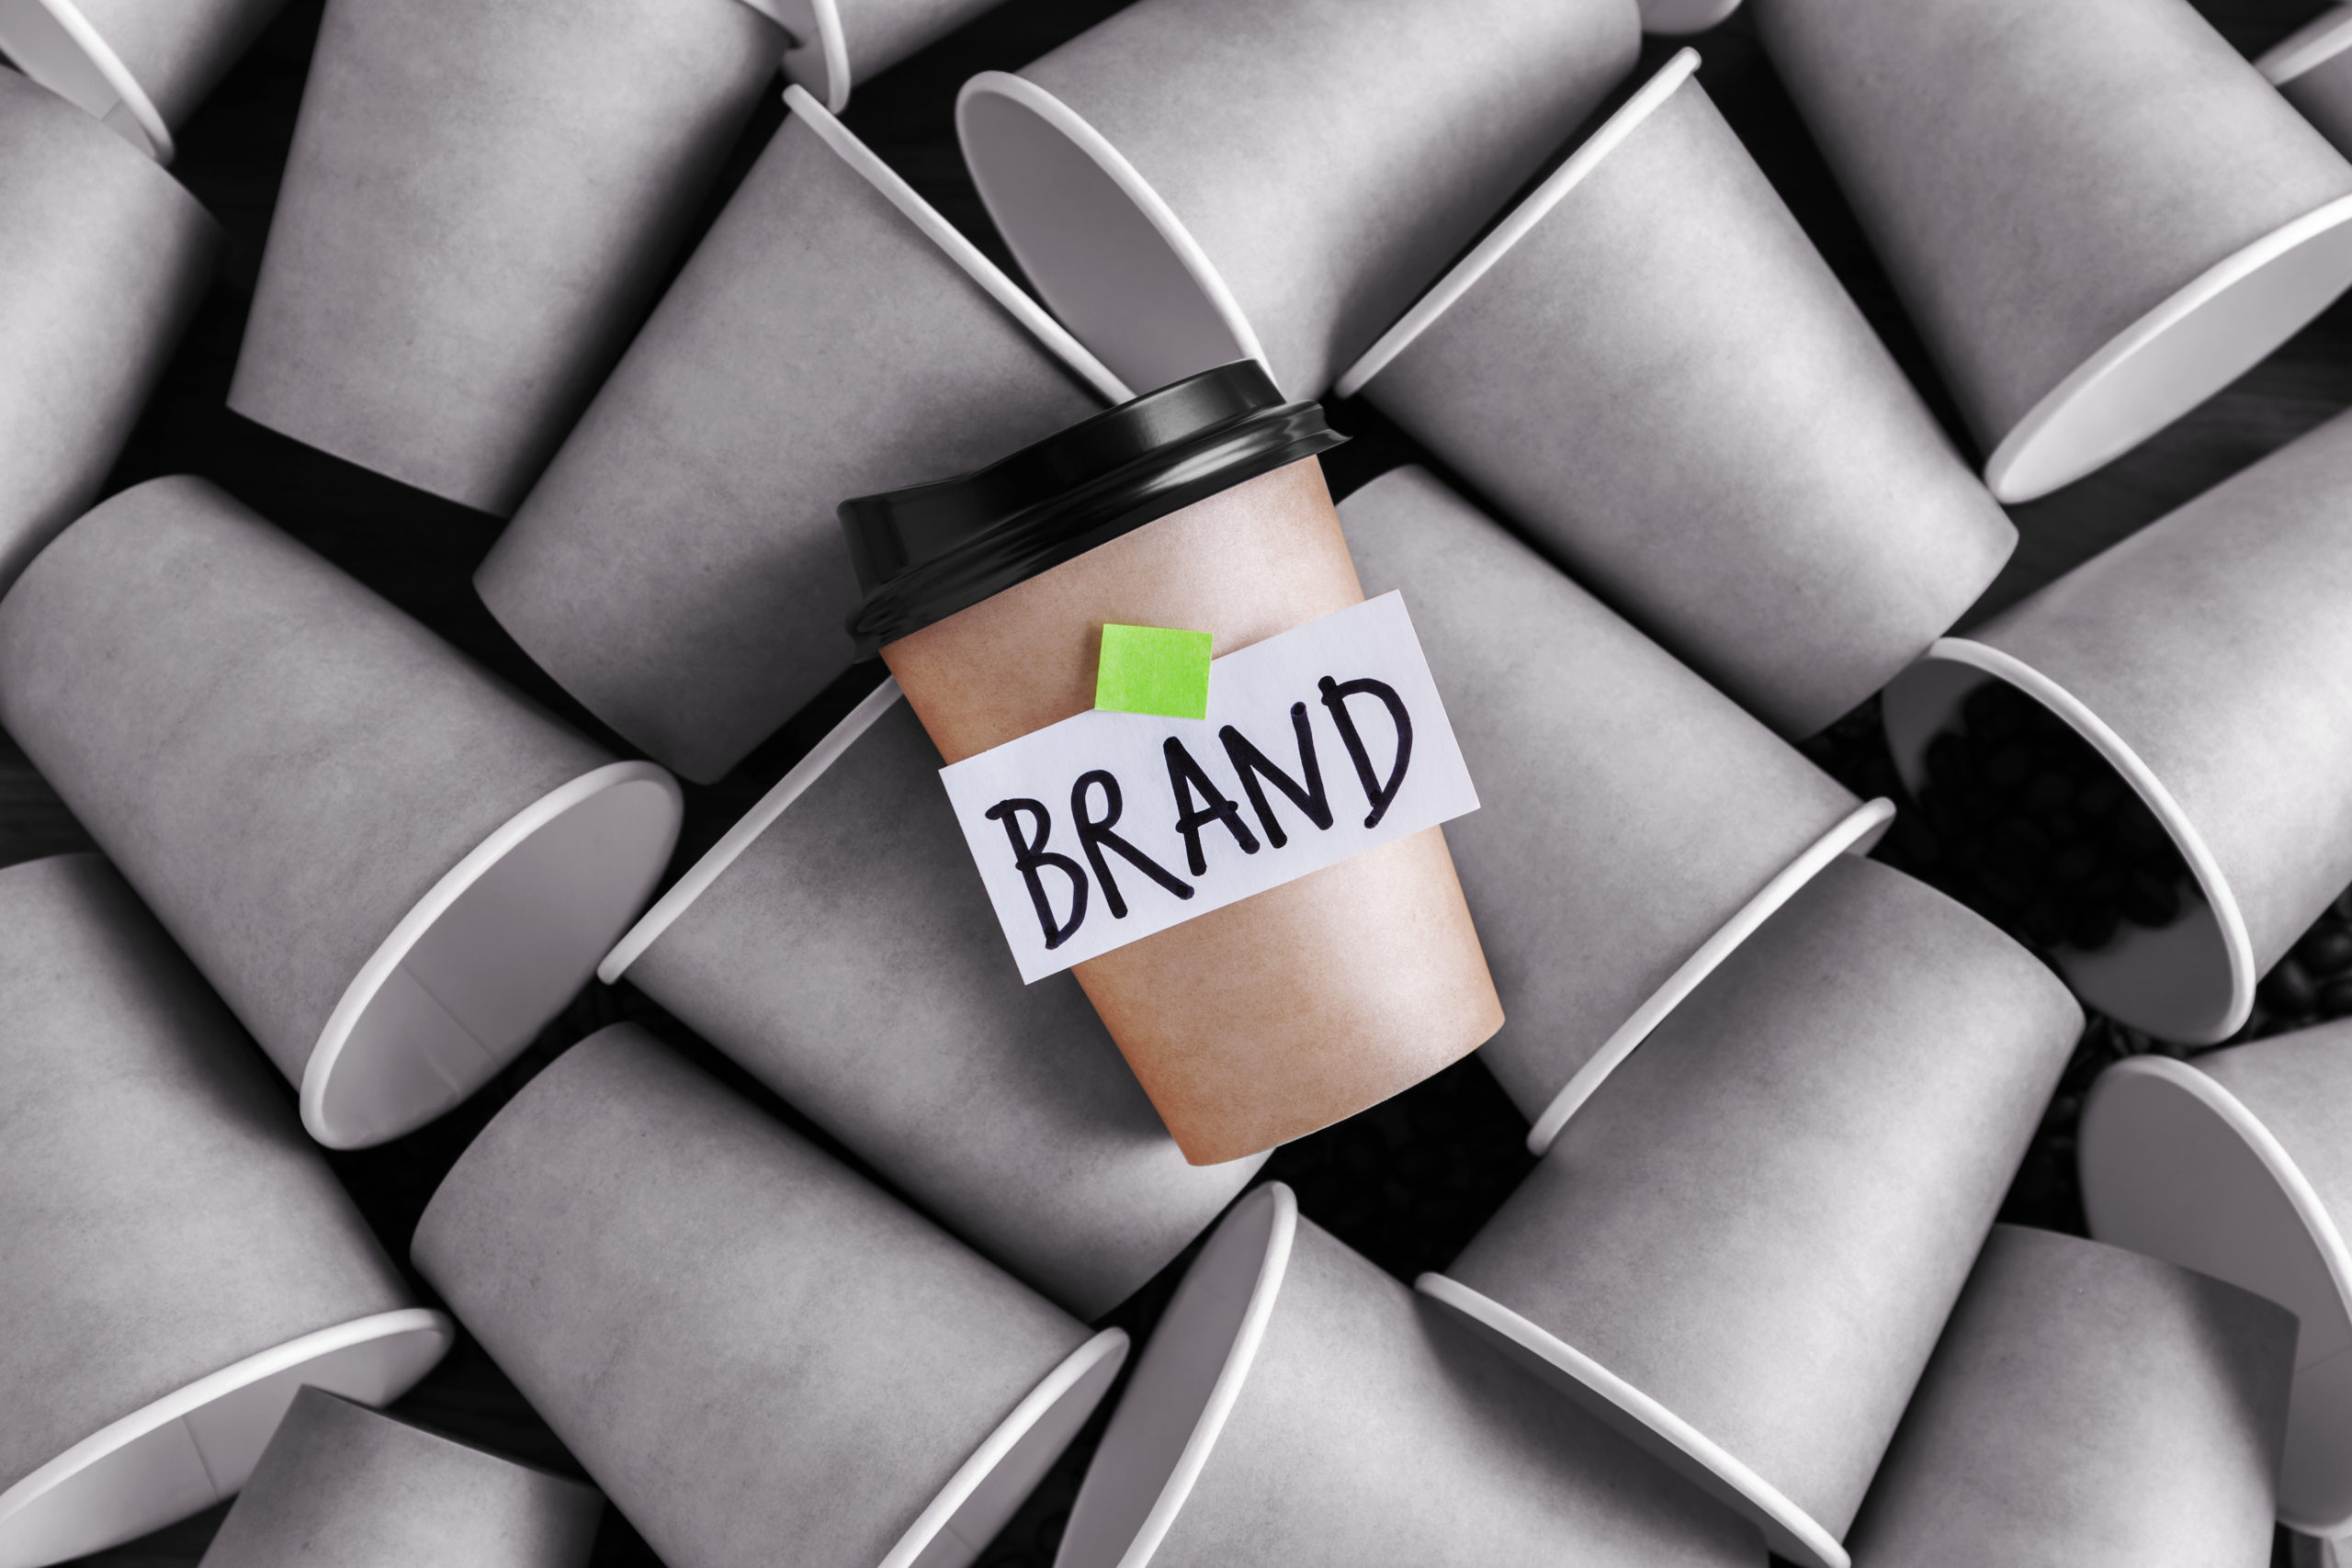 Branding illustration shows plain paper cups and a branded one that stands out